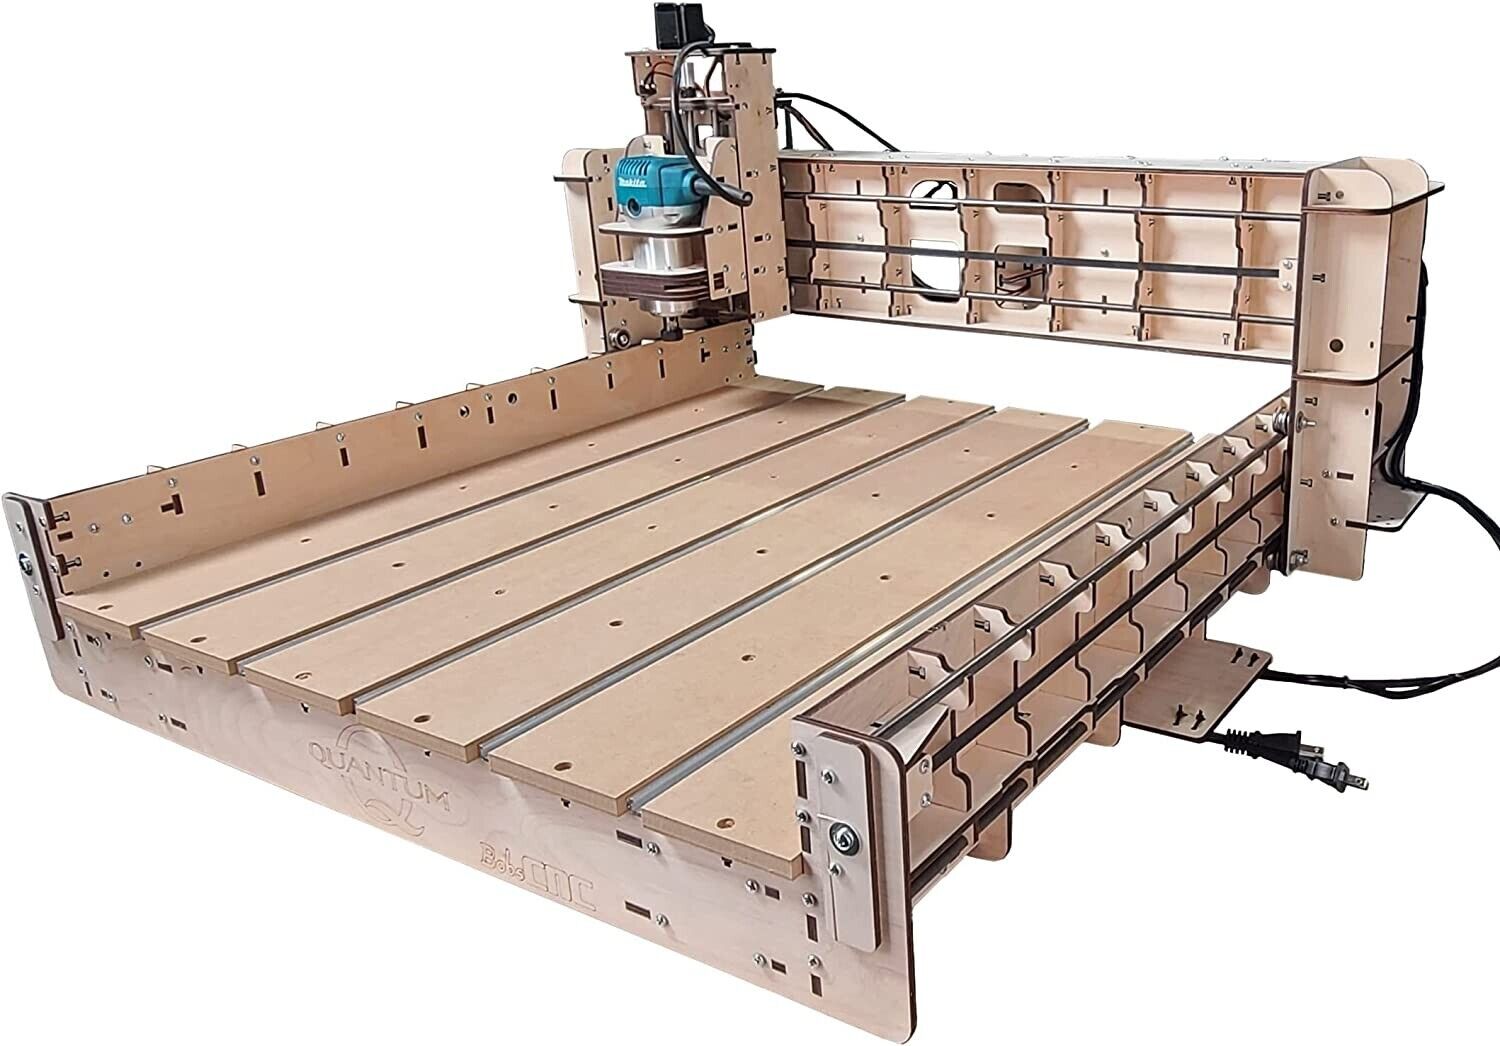 BobsCNC Quantum CNC Router Kit with the Makita Router